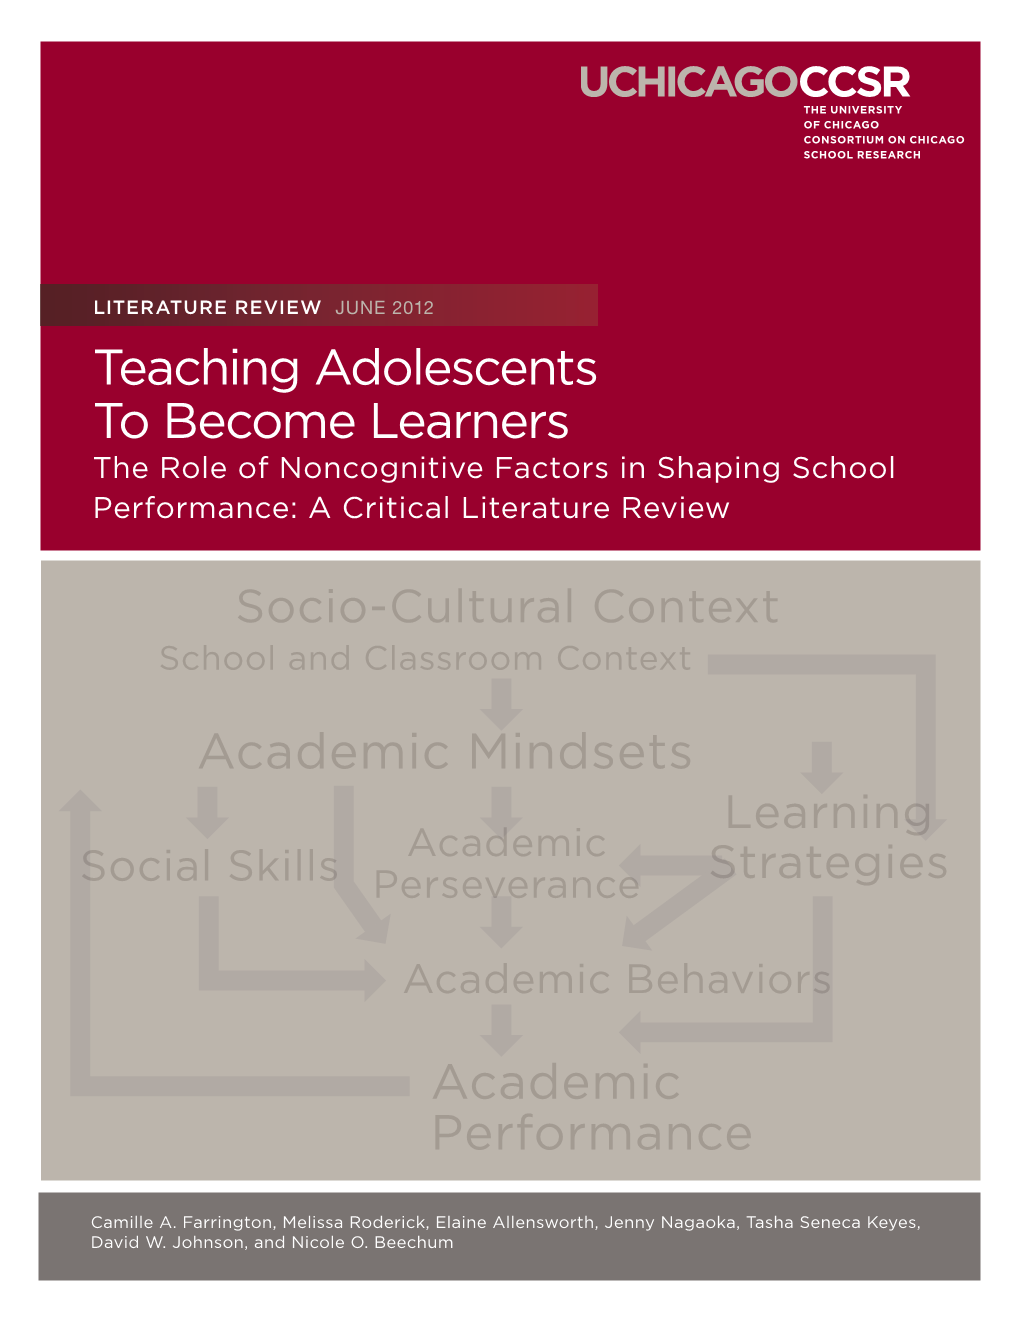 Teaching Adolescents to Become Learners the Role of Noncognitive Factors in Shaping School Performance: a Critical Literature Review